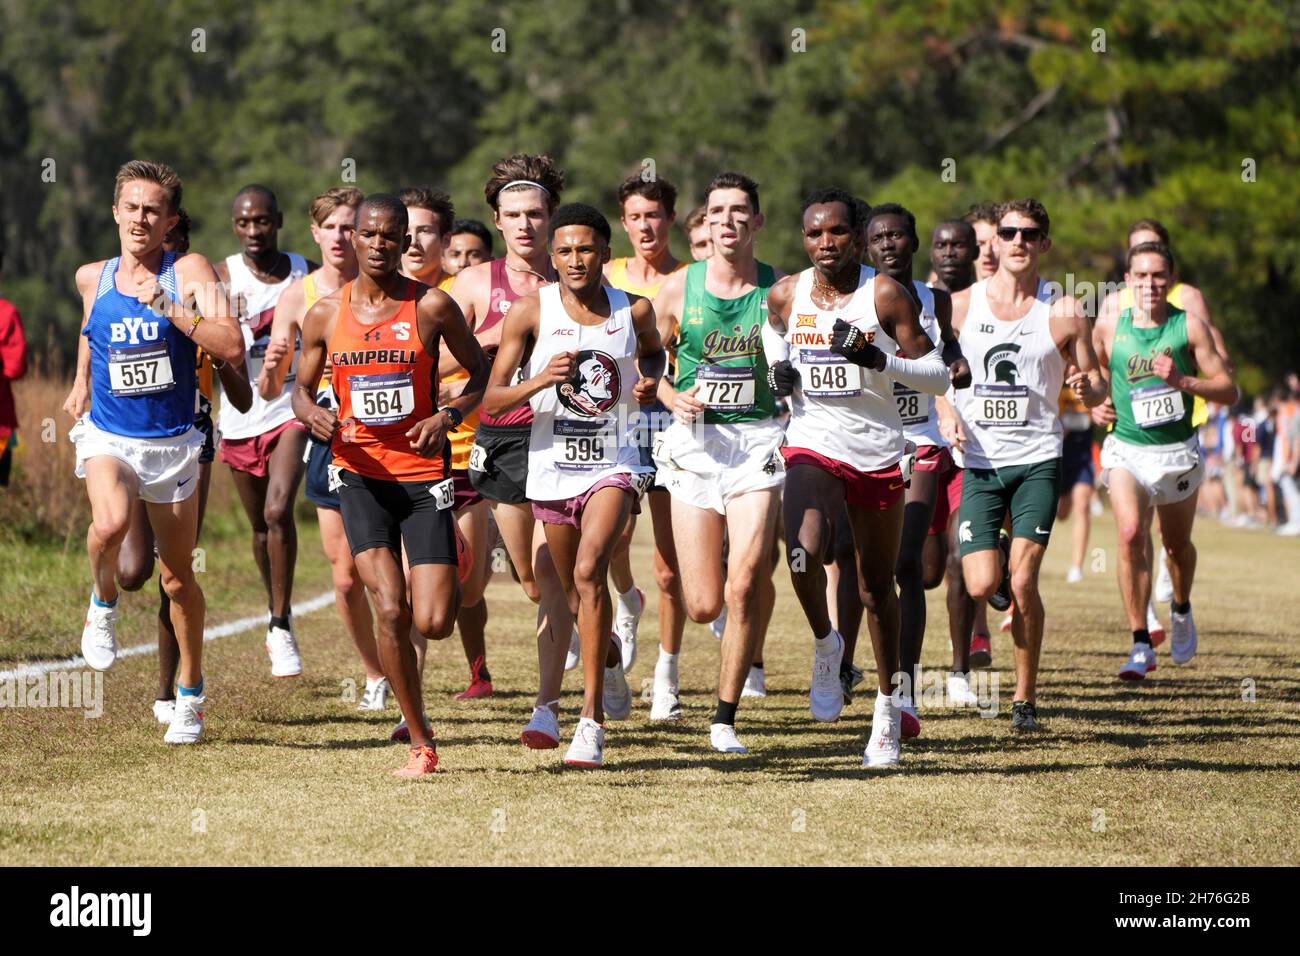 The leaders in the men's race, Conner Mantz of BYU (560), Athanas Kioko of Campbell (564), Adriaan Wildschutt of Florida State (599) and Wesley Kiptoo Stock Photo